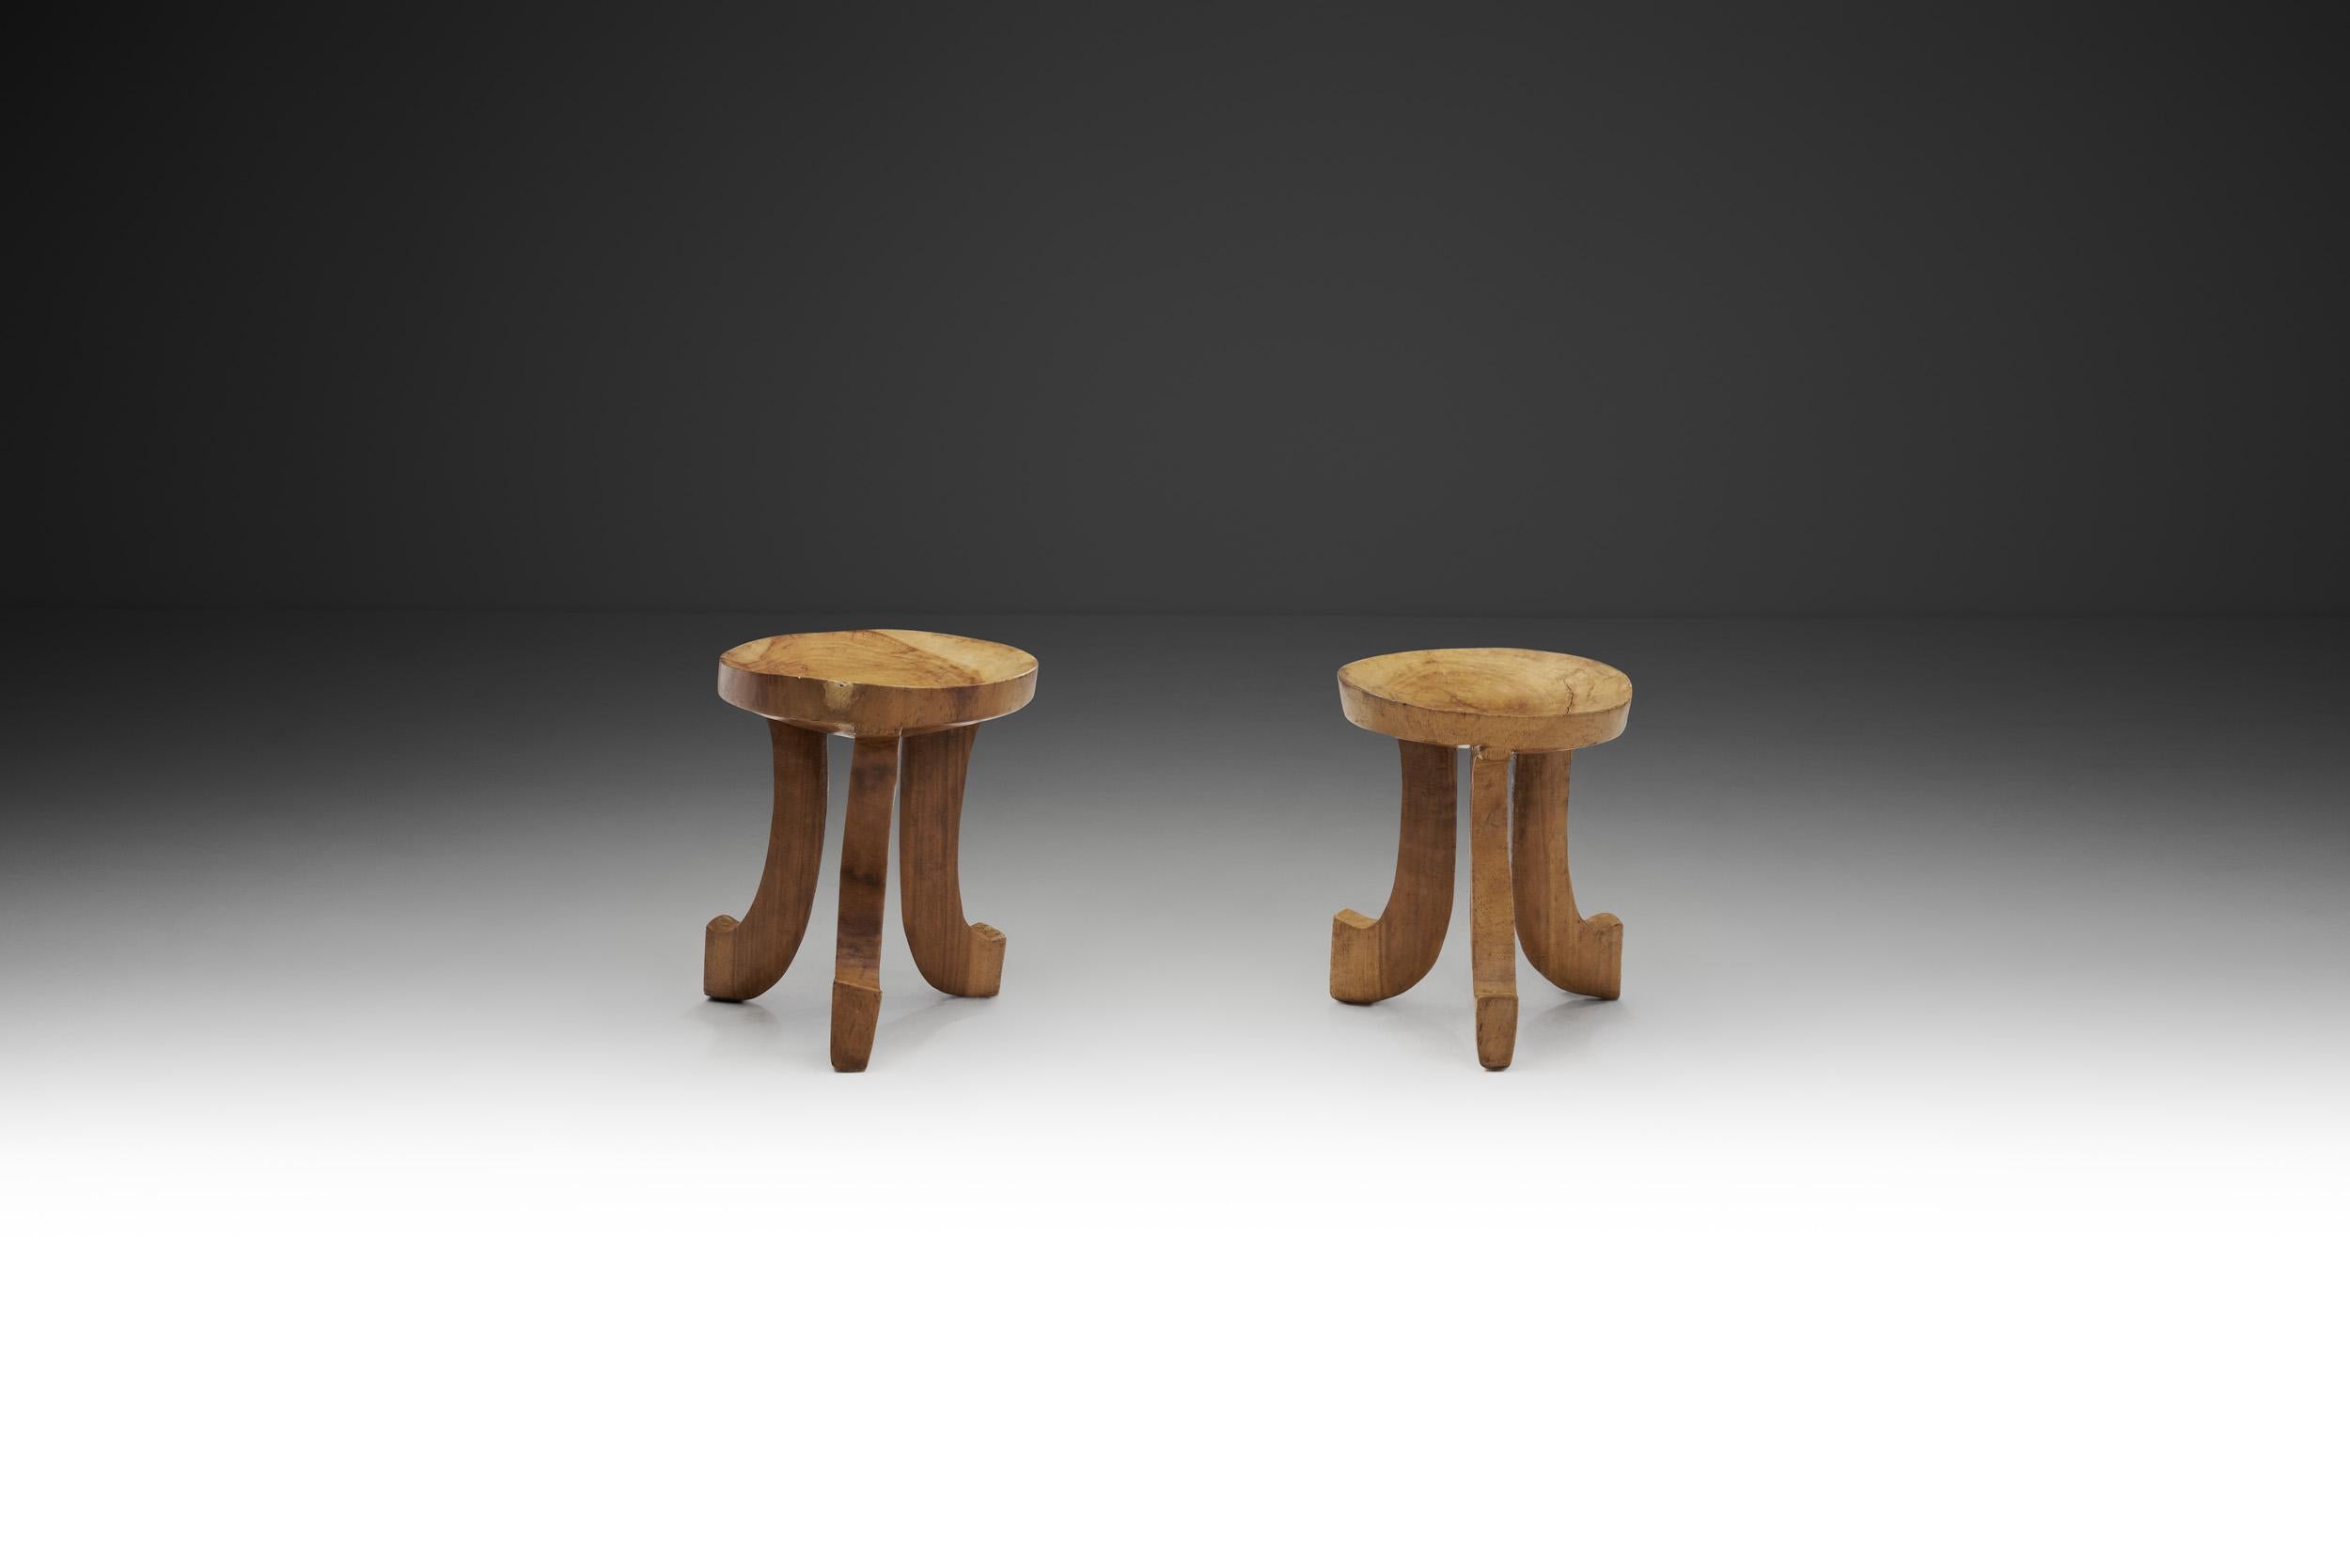 Brutalist Ethiopian-Style Stool with Scrolled Legs, Norway, First Half of the 20th Century